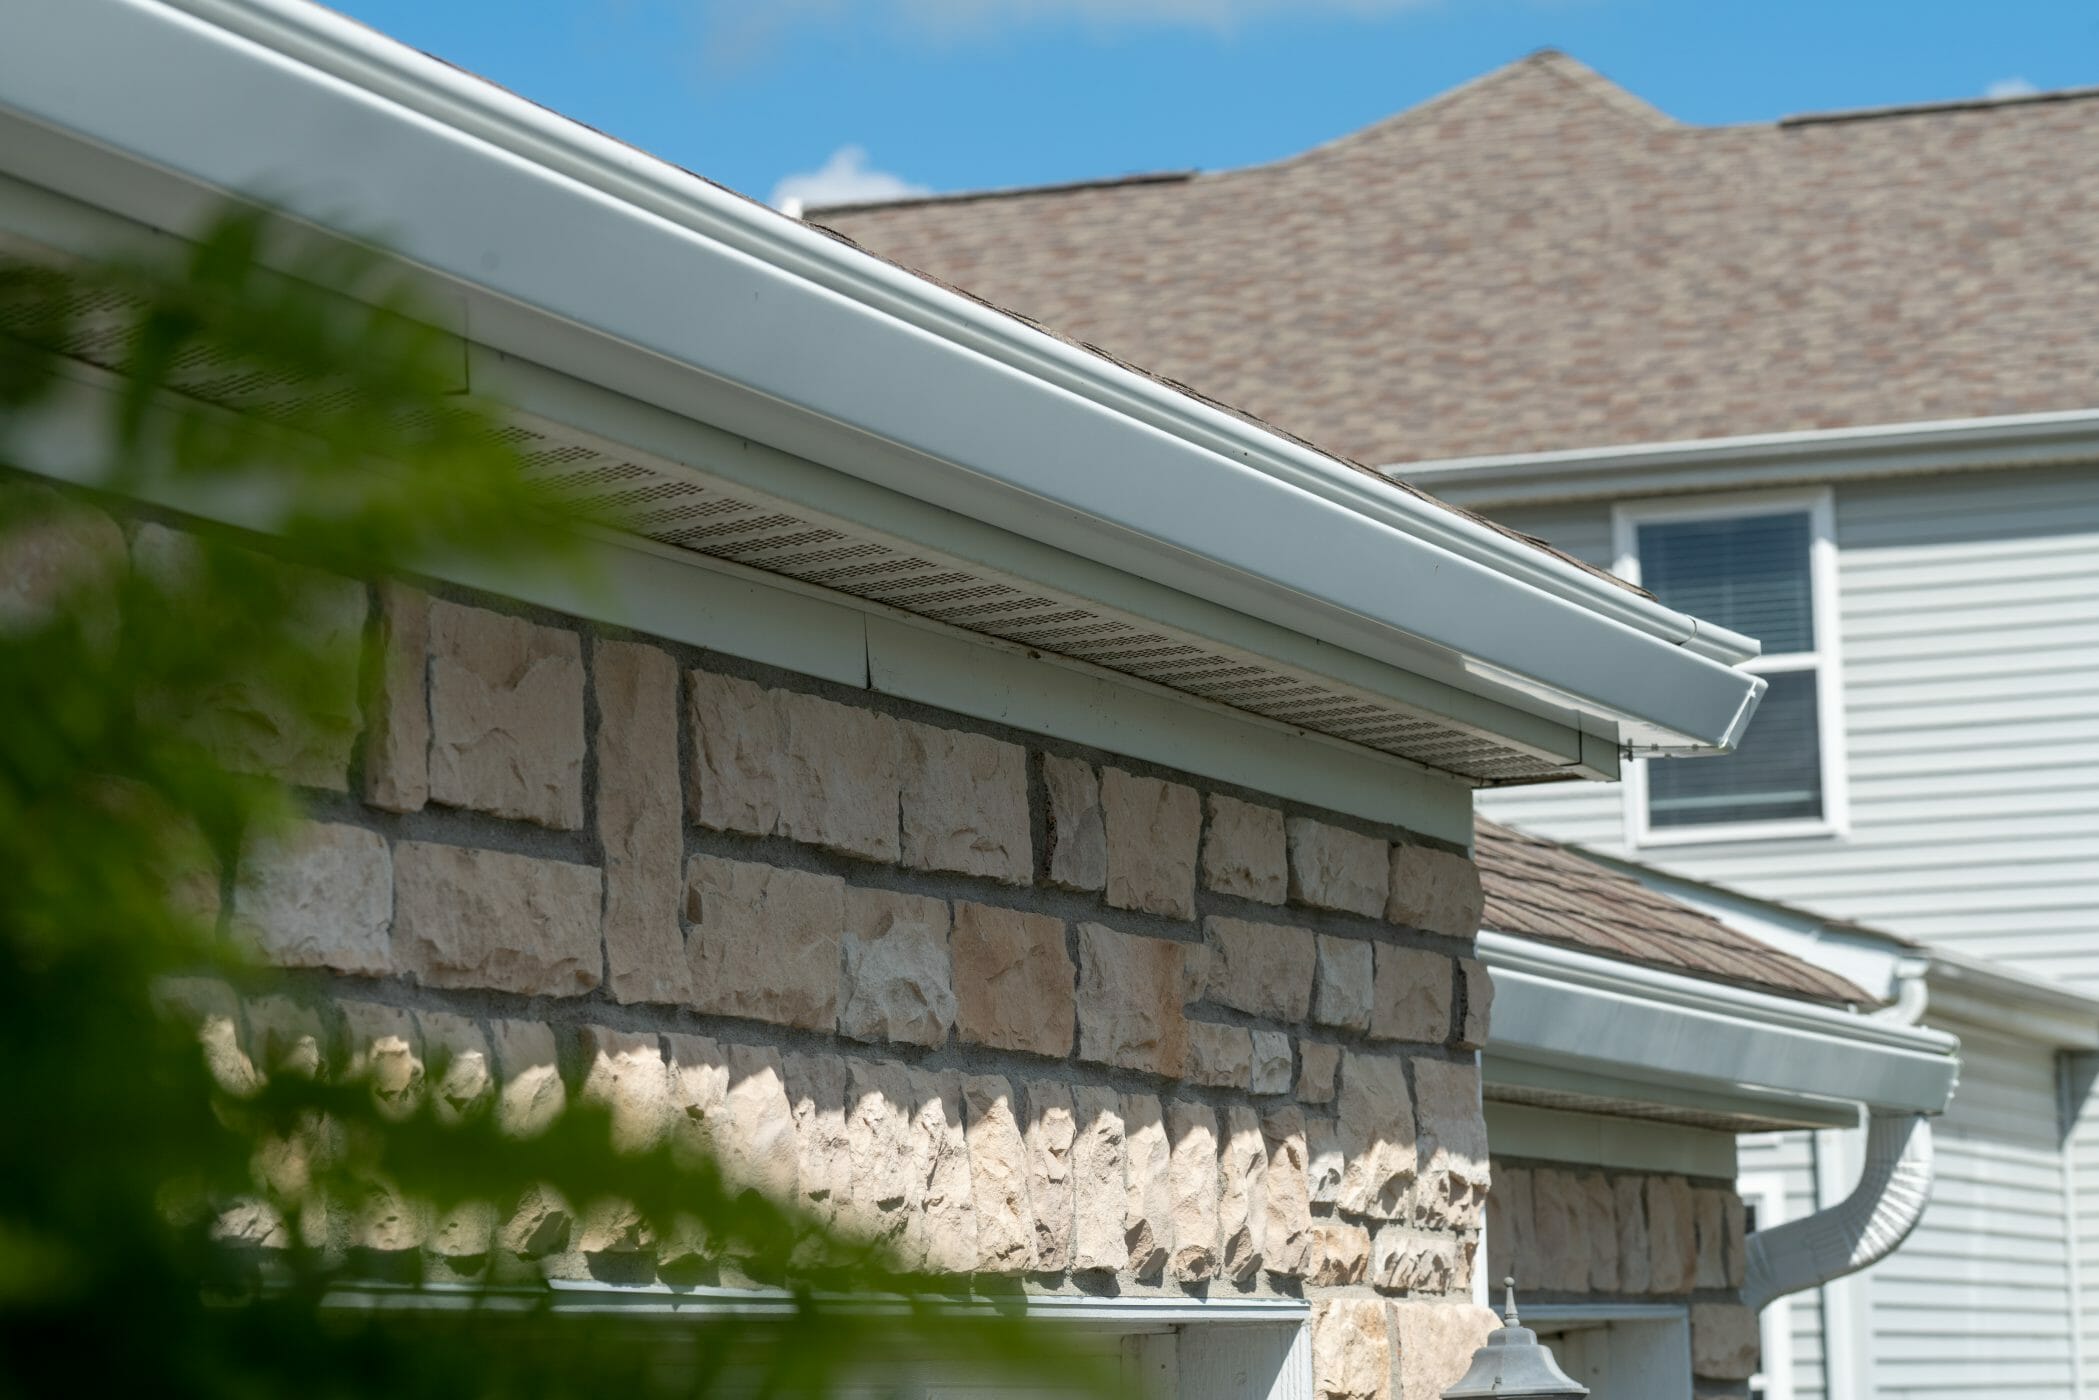 Gutter Guards To Protect Your Home's Exterior